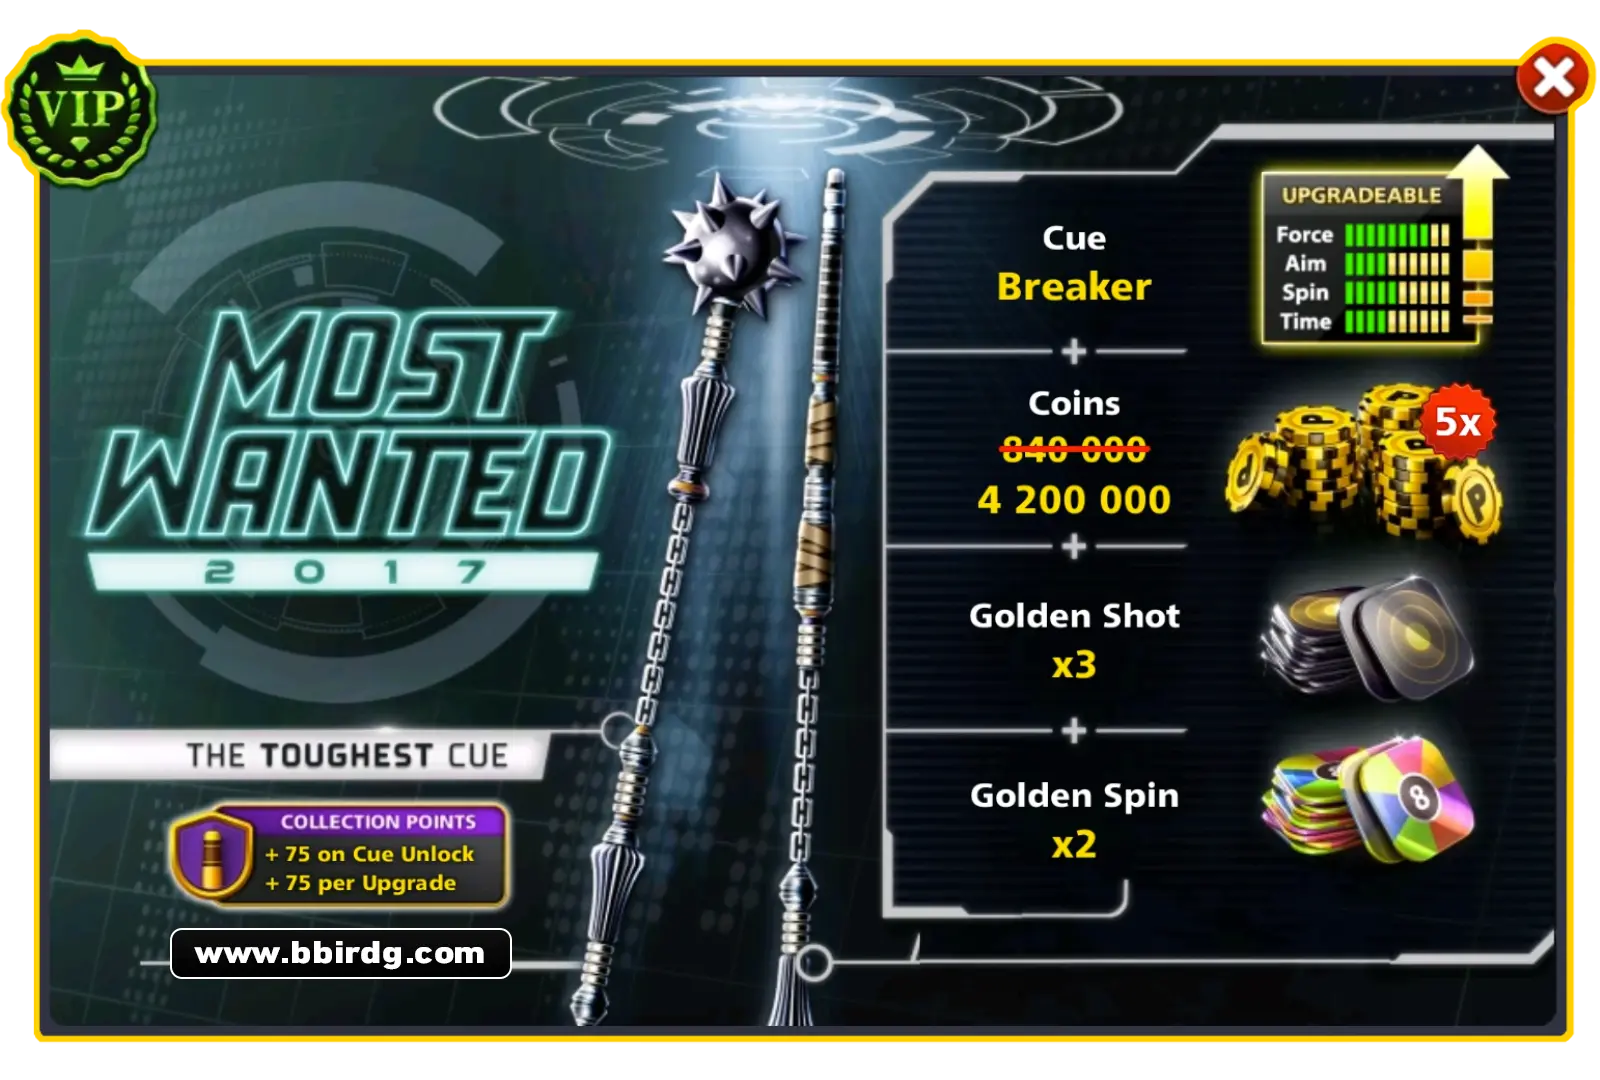 Breaker Cue - Most Wanted | 8 Ball Pool - BlackBird Store